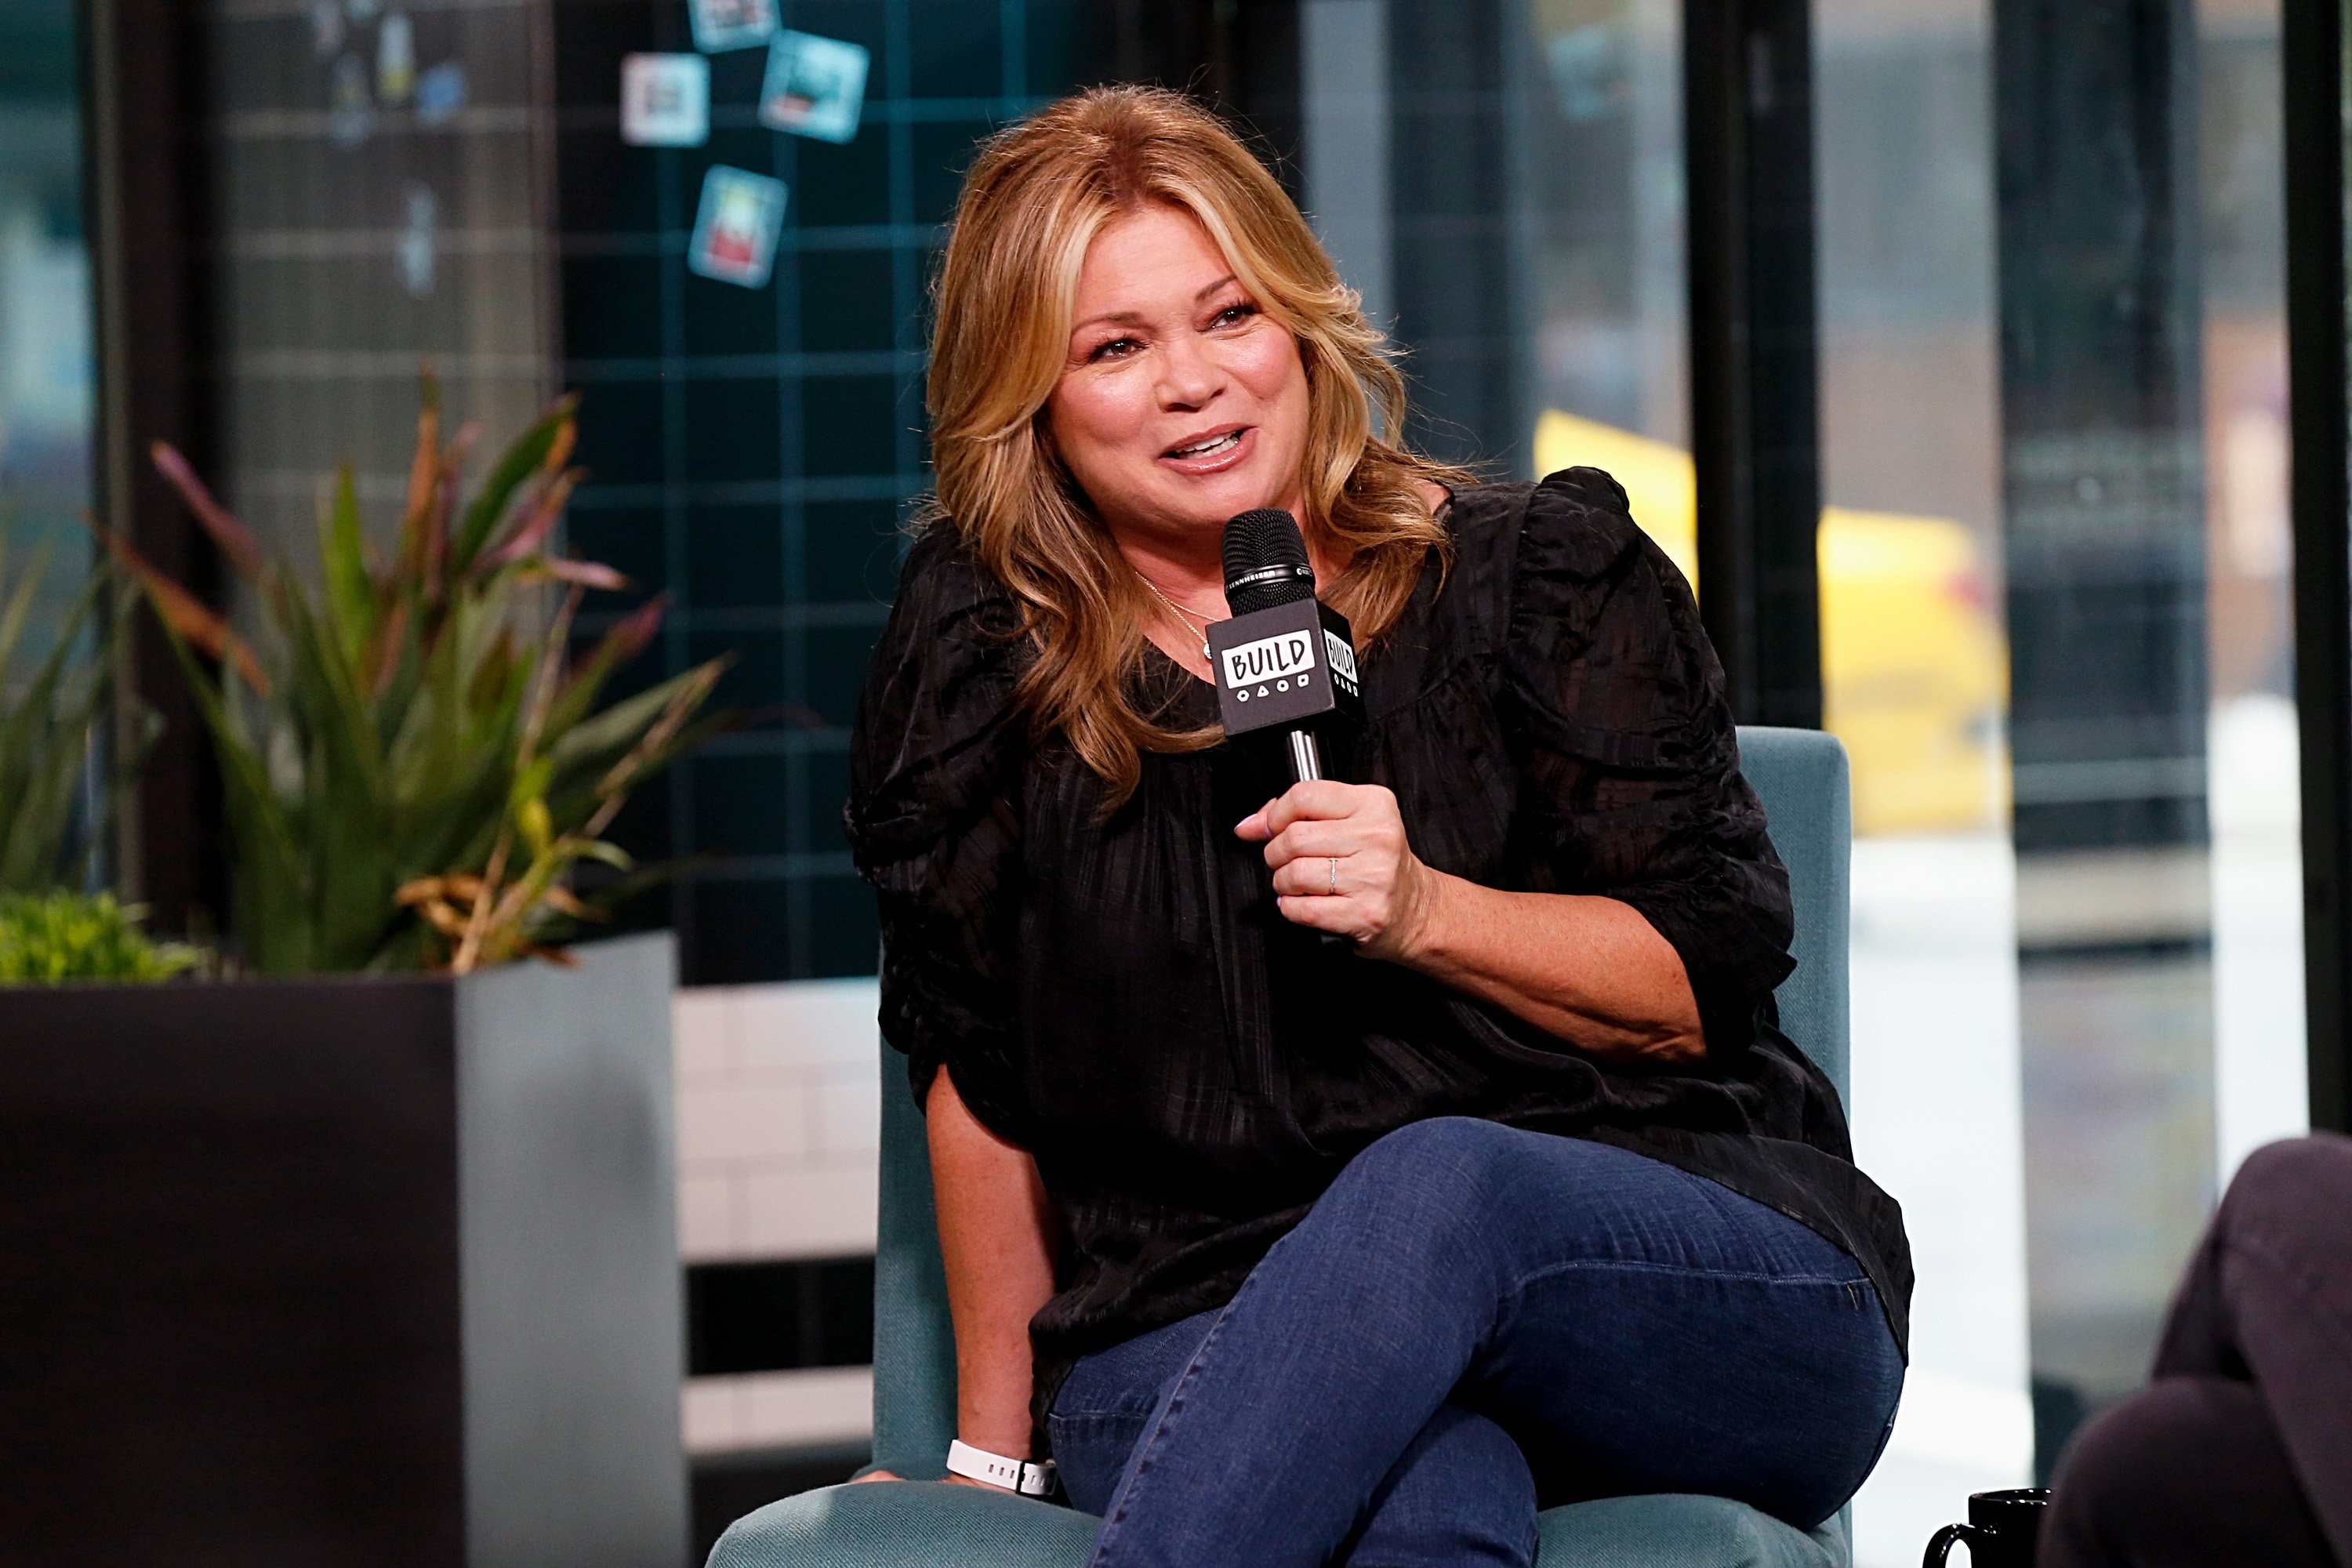 Food Network personality Valerie Bertinelli discusses 'Kids Baking Championship' in 2019.